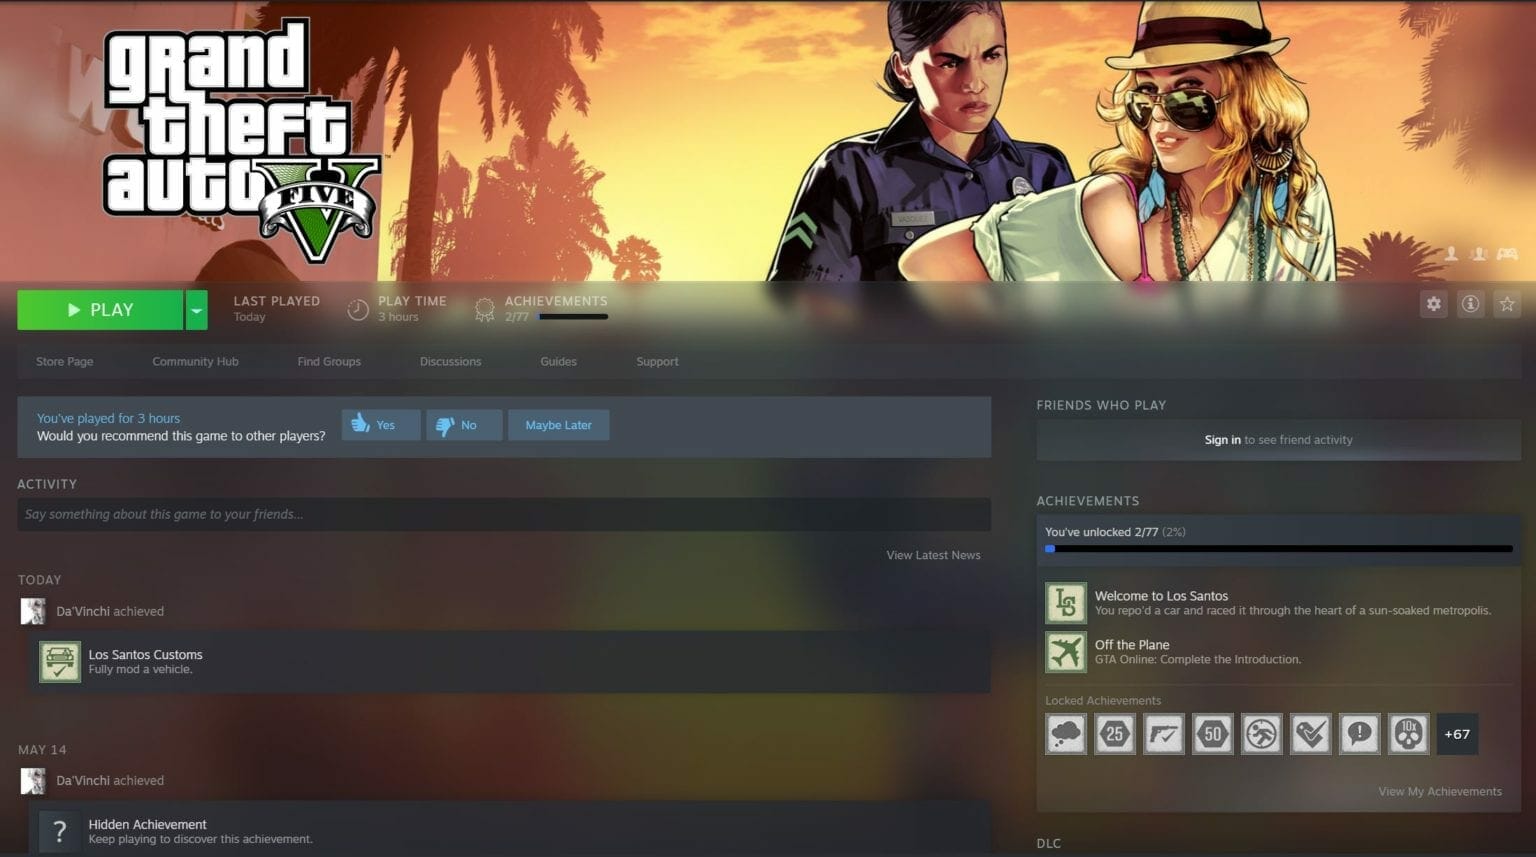 How to Copy GTA V Files from Steam to Epic Games including Cracked